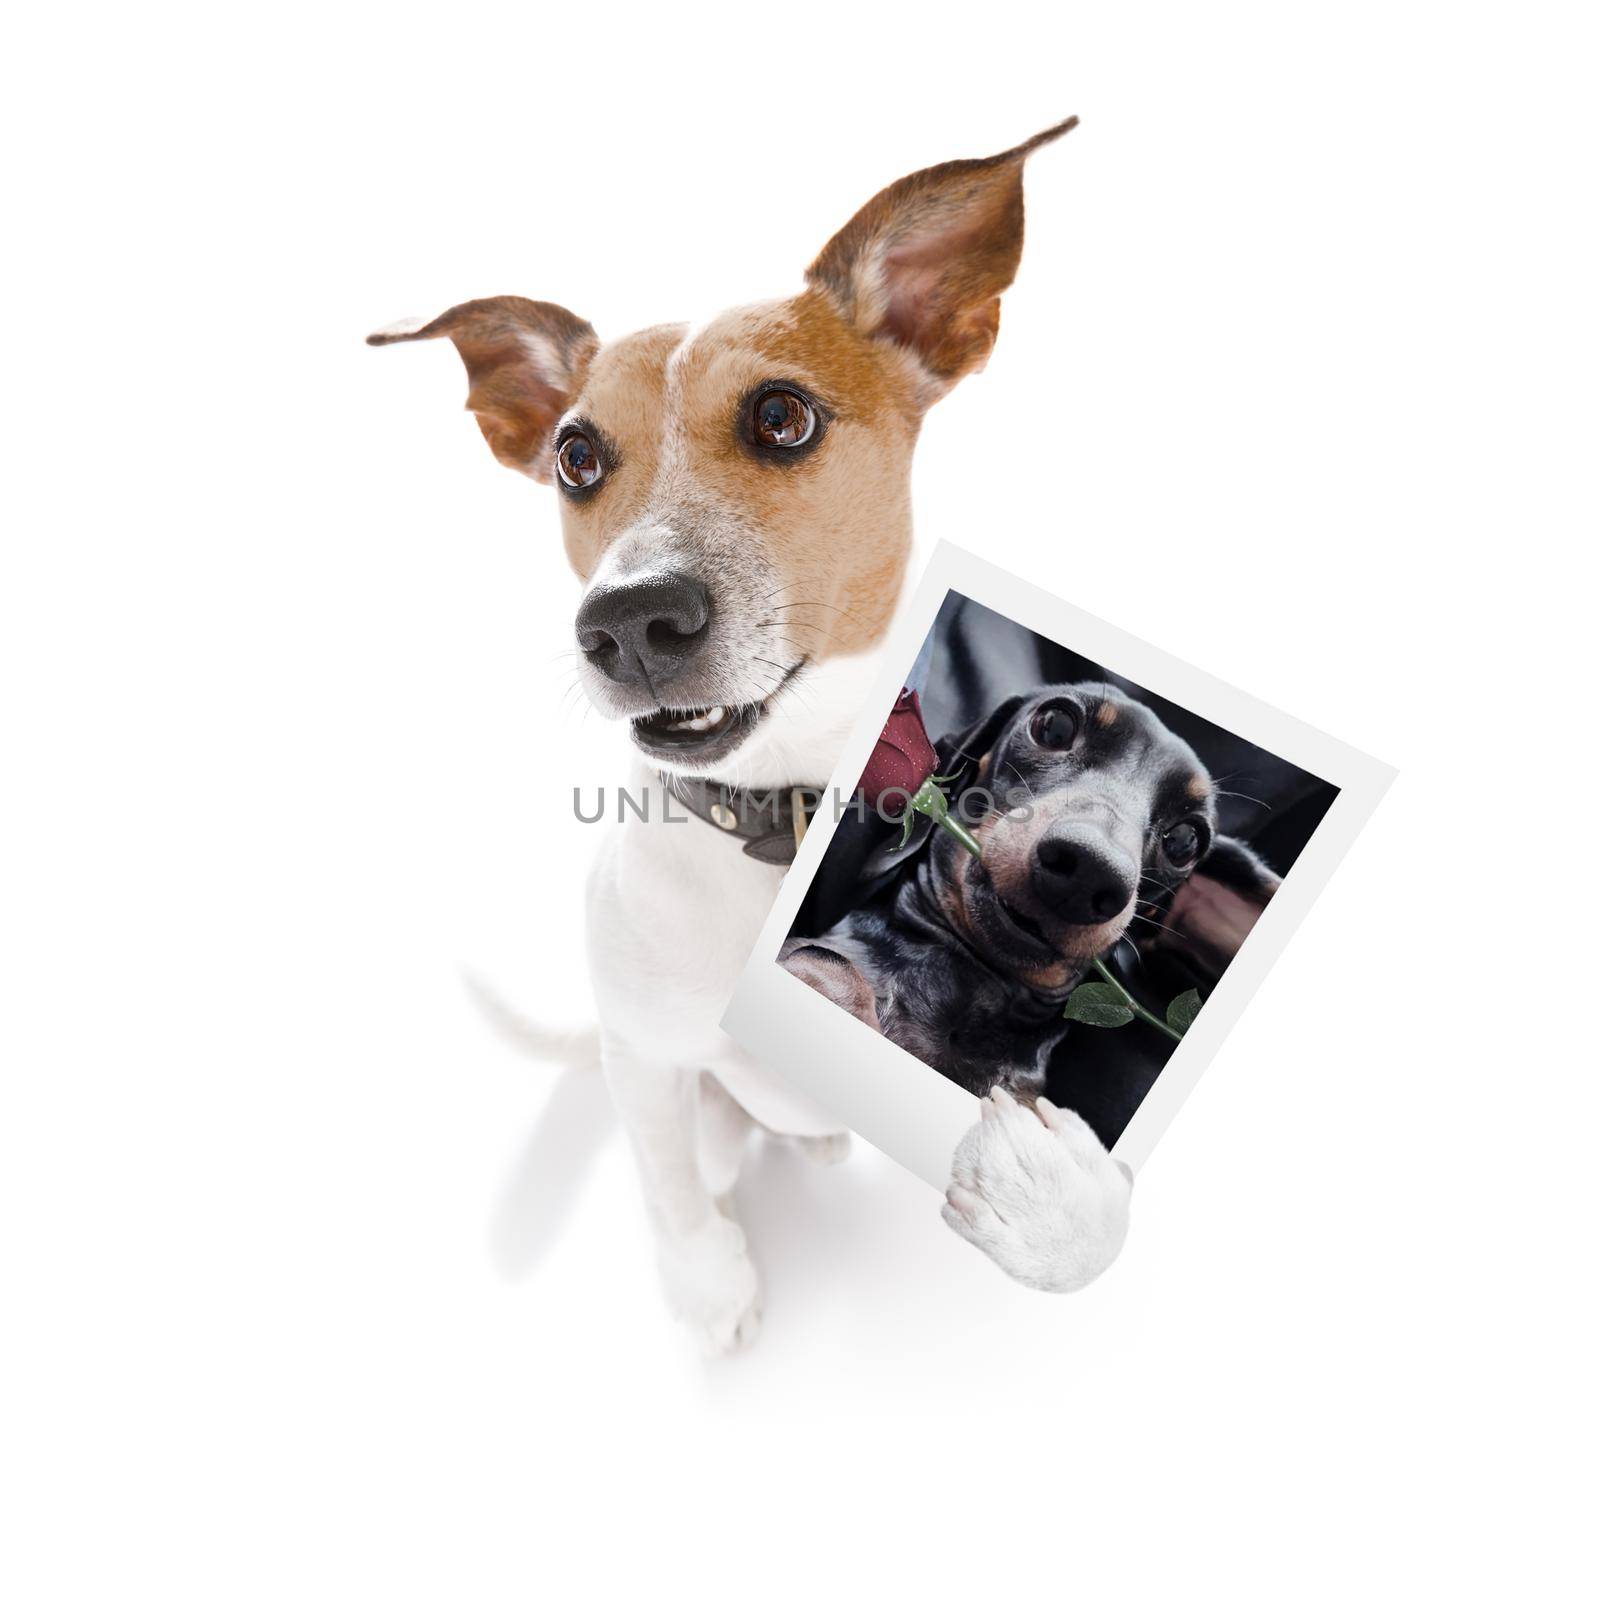 super funny jack russell dog holding a photograph with old retro style look isolated on white background